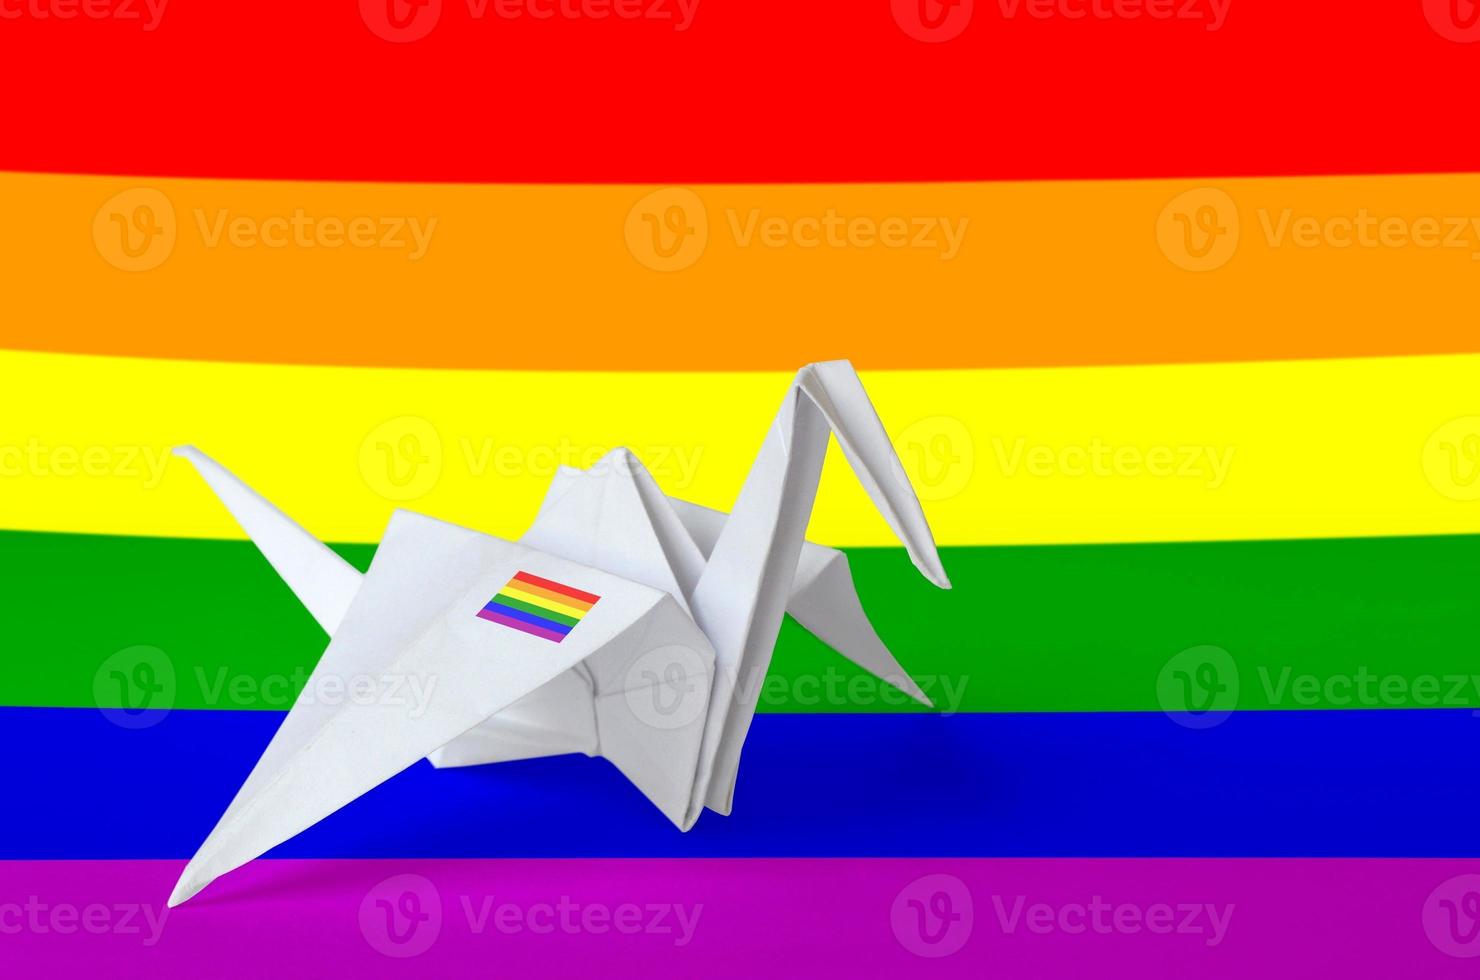 LGBT community flag depicted on paper origami crane wing. Handmade arts concept photo